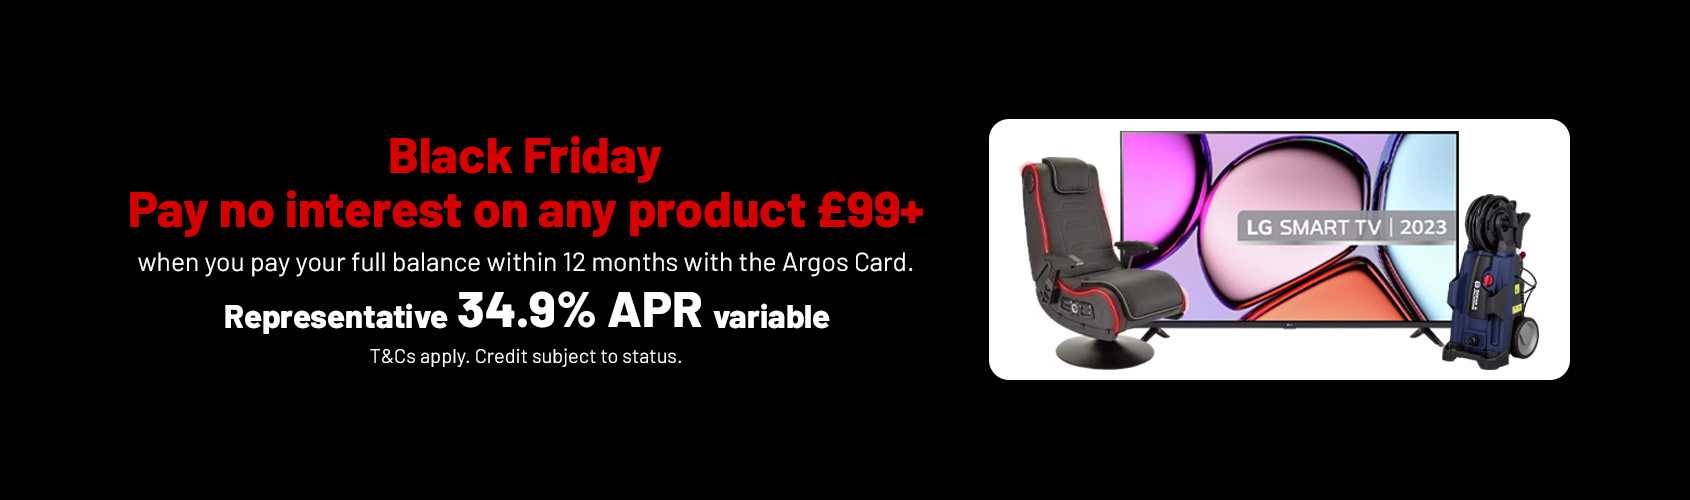 Black Friday. Pay no interest on any product 99+ when you pay your full balance within 12 months with the Argos Card.